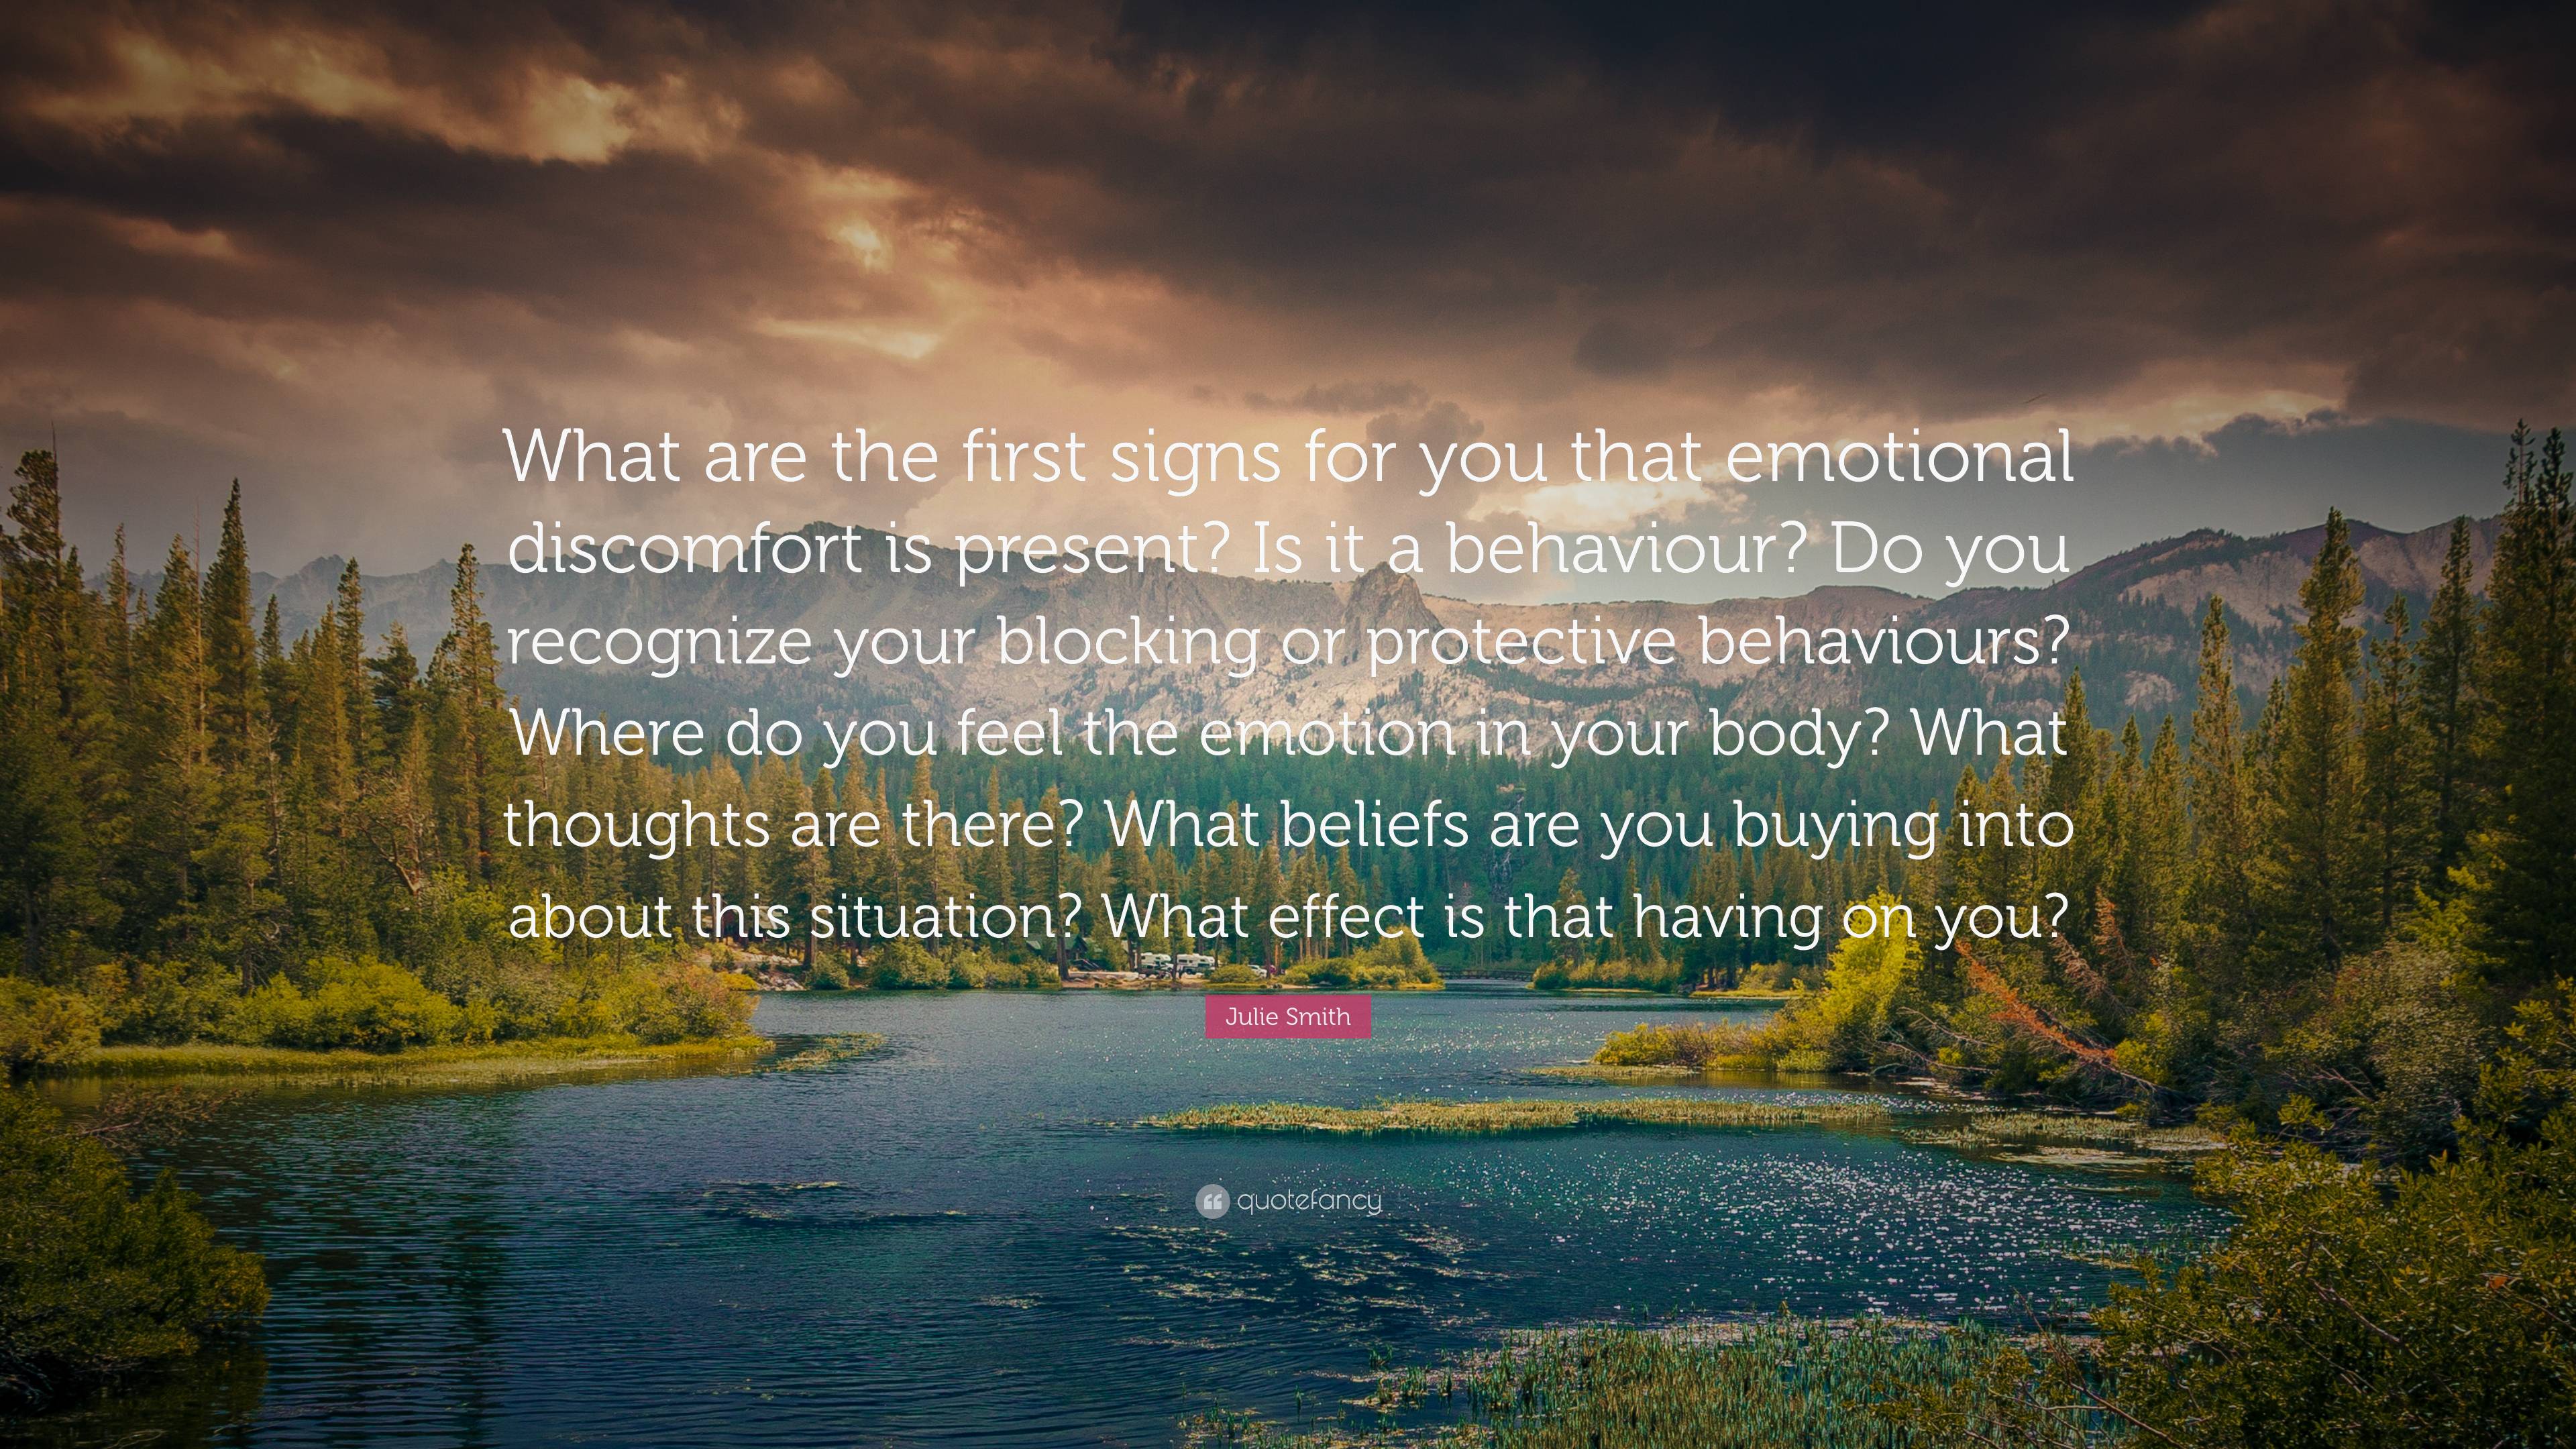 Julie Smith Quote: “What are the first signs for you that emotional ...